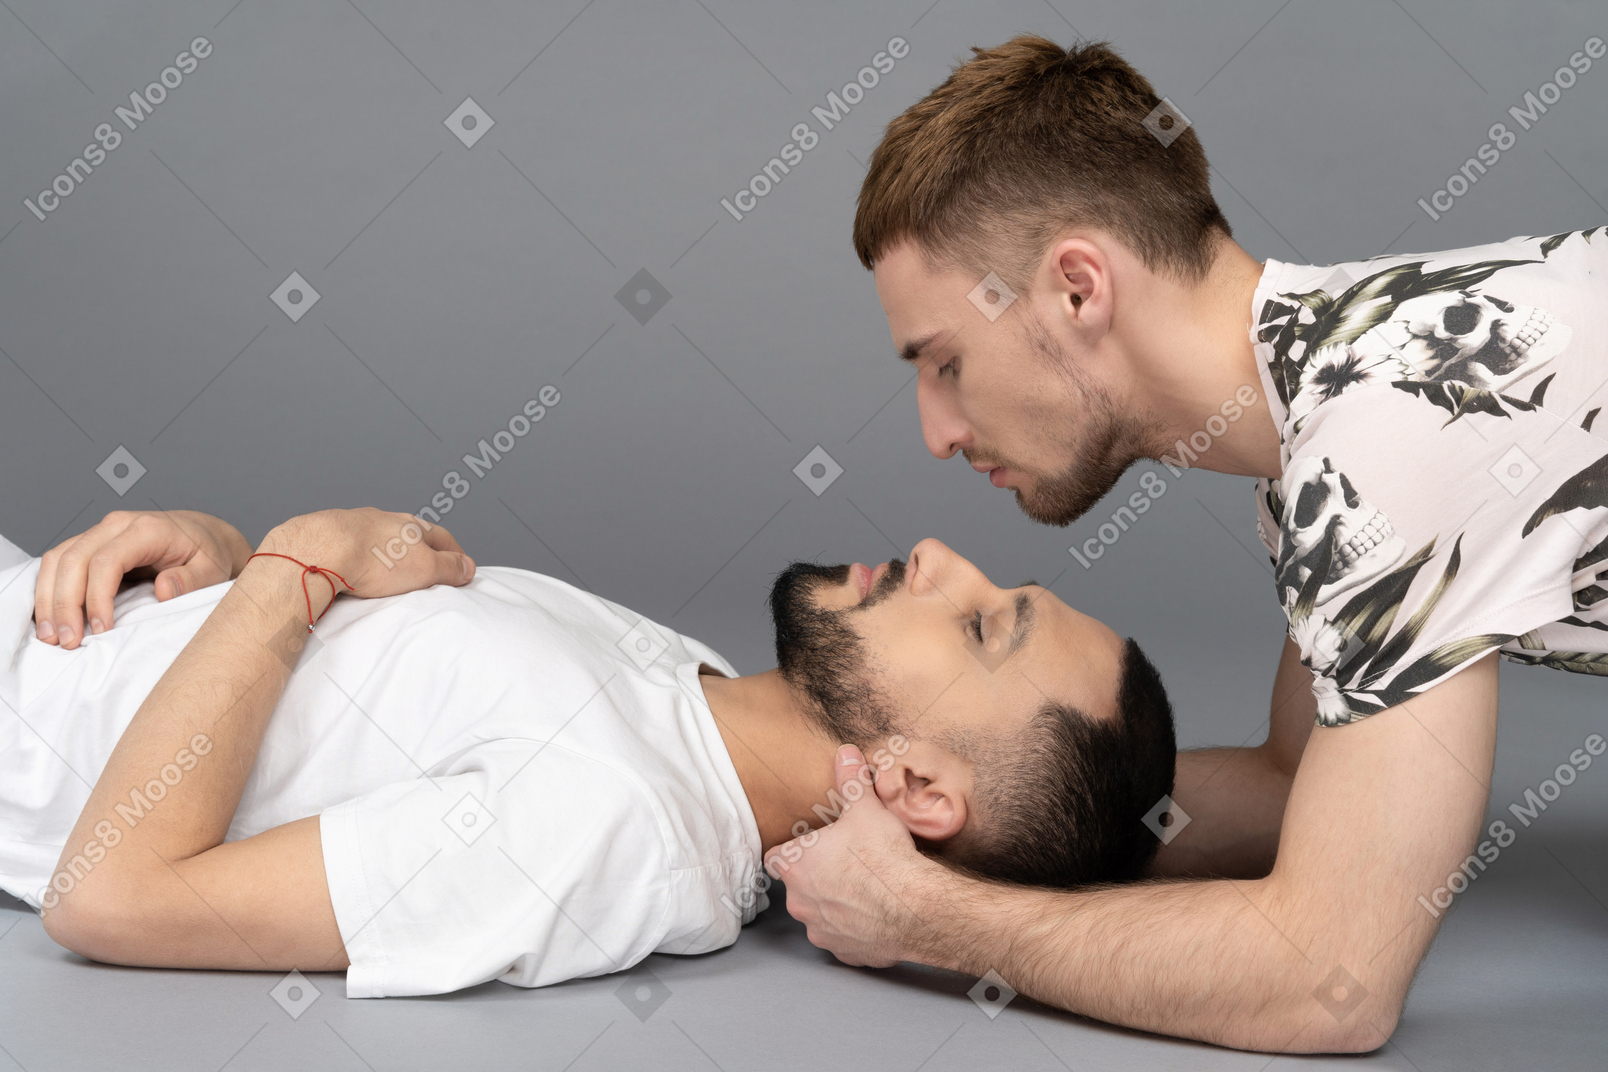 Two young caucasian men lying on the floor one looming over another gently